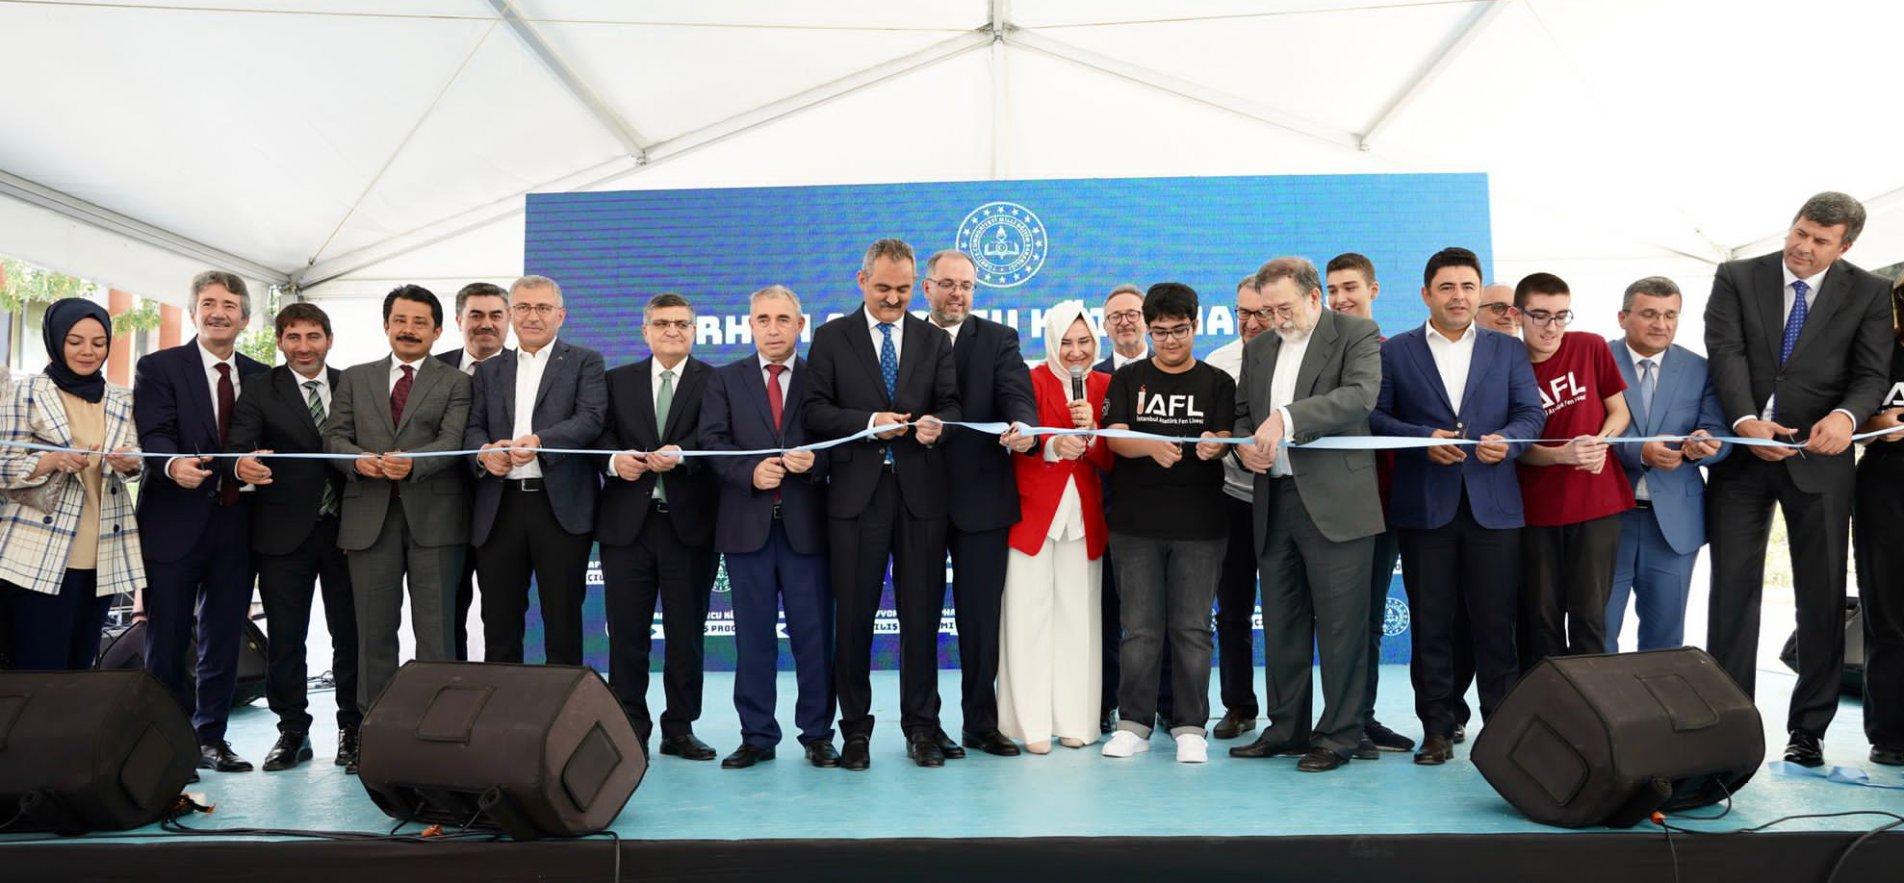 MINISTER ÖZER INAUGURATED ERHAN AFYONCU LIBRARY